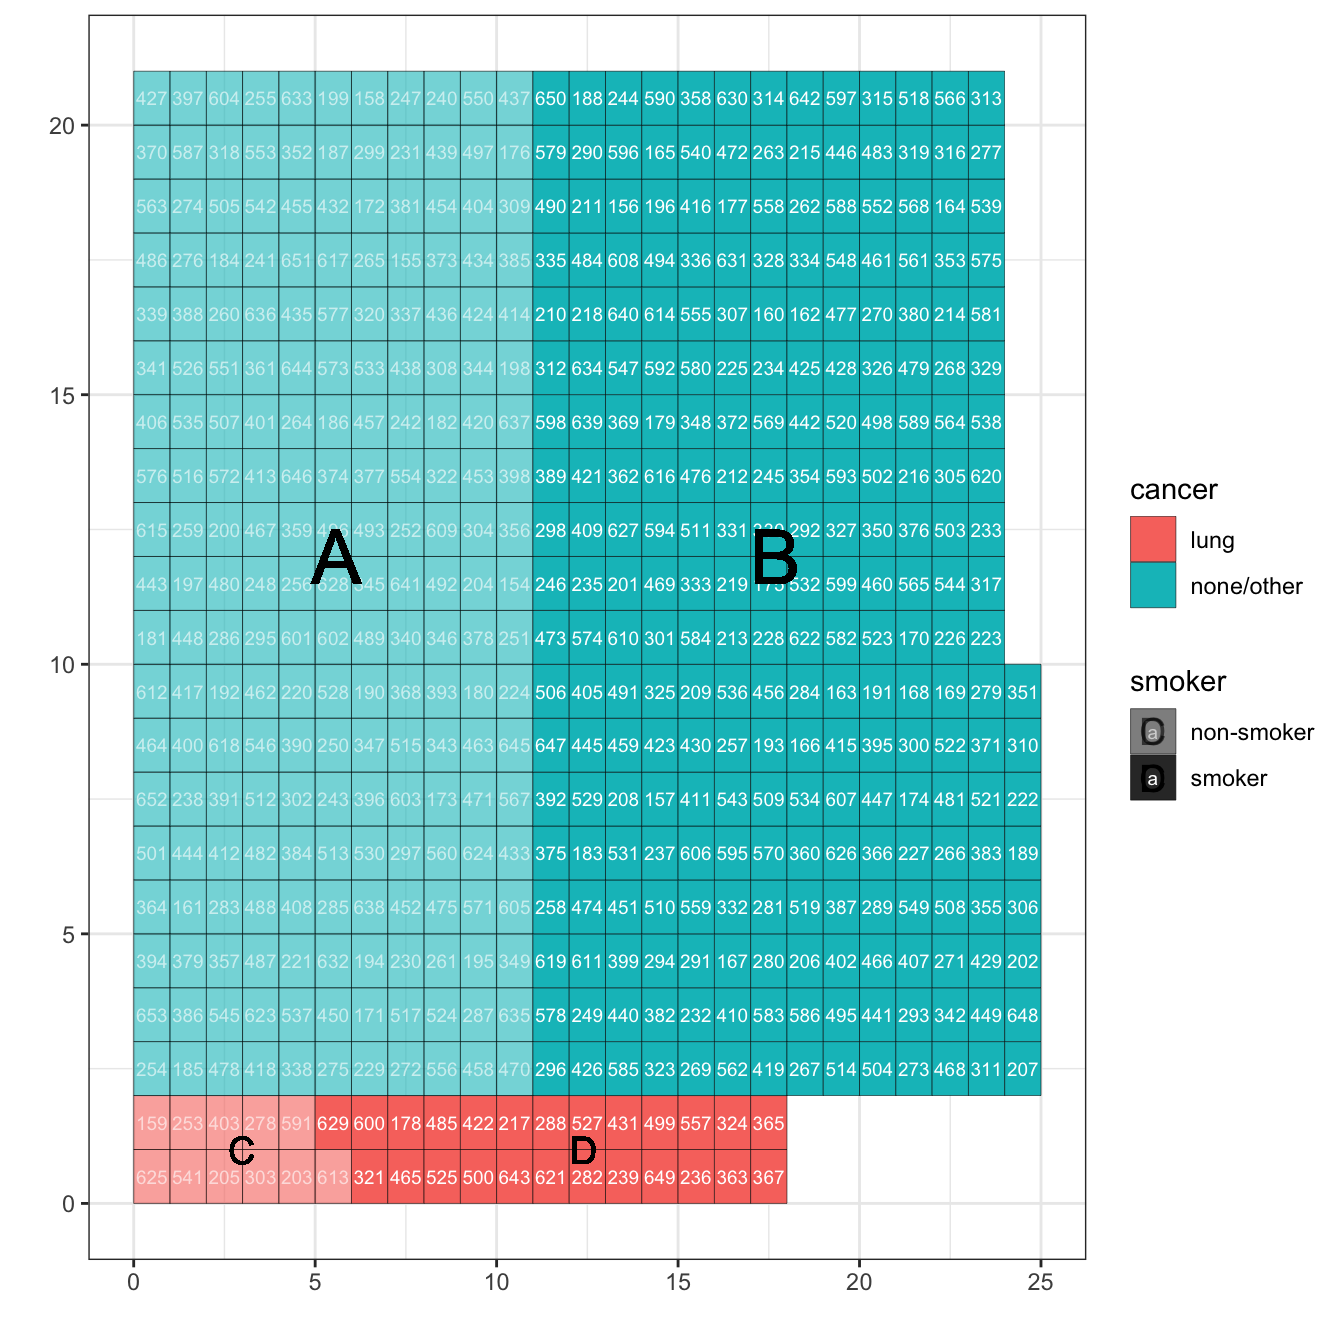 The population data arranged neatly into rows and columns so that it’s easy to see the relative size of four groups: A) non-smokers without cancer; B) smokers without cancer; C) non-smokers with lung cancer; D) smokers with lung cancer.